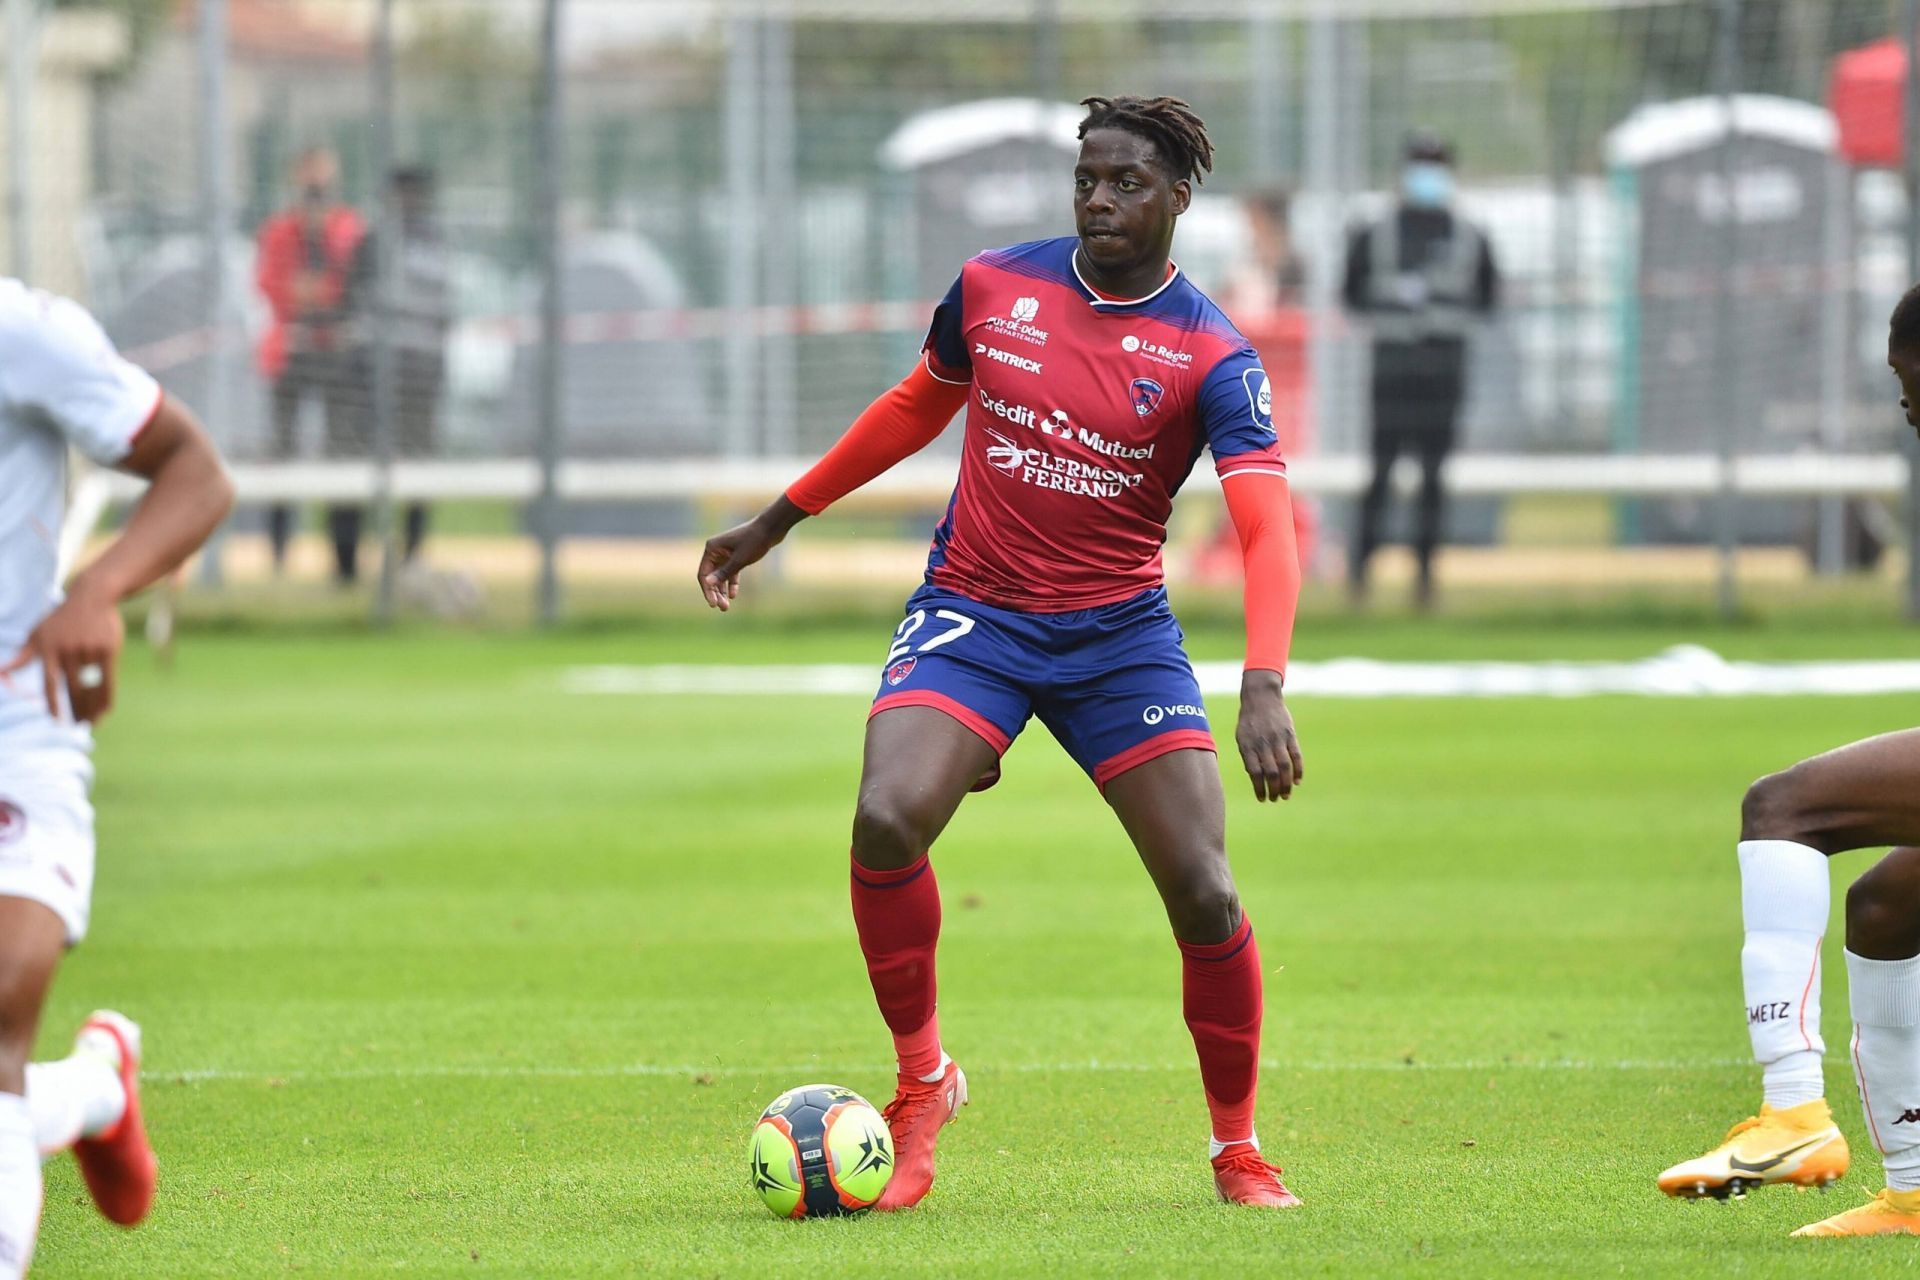 Can Mohamed Bayo help Clermont to a vital win over Montpellier this weekend?